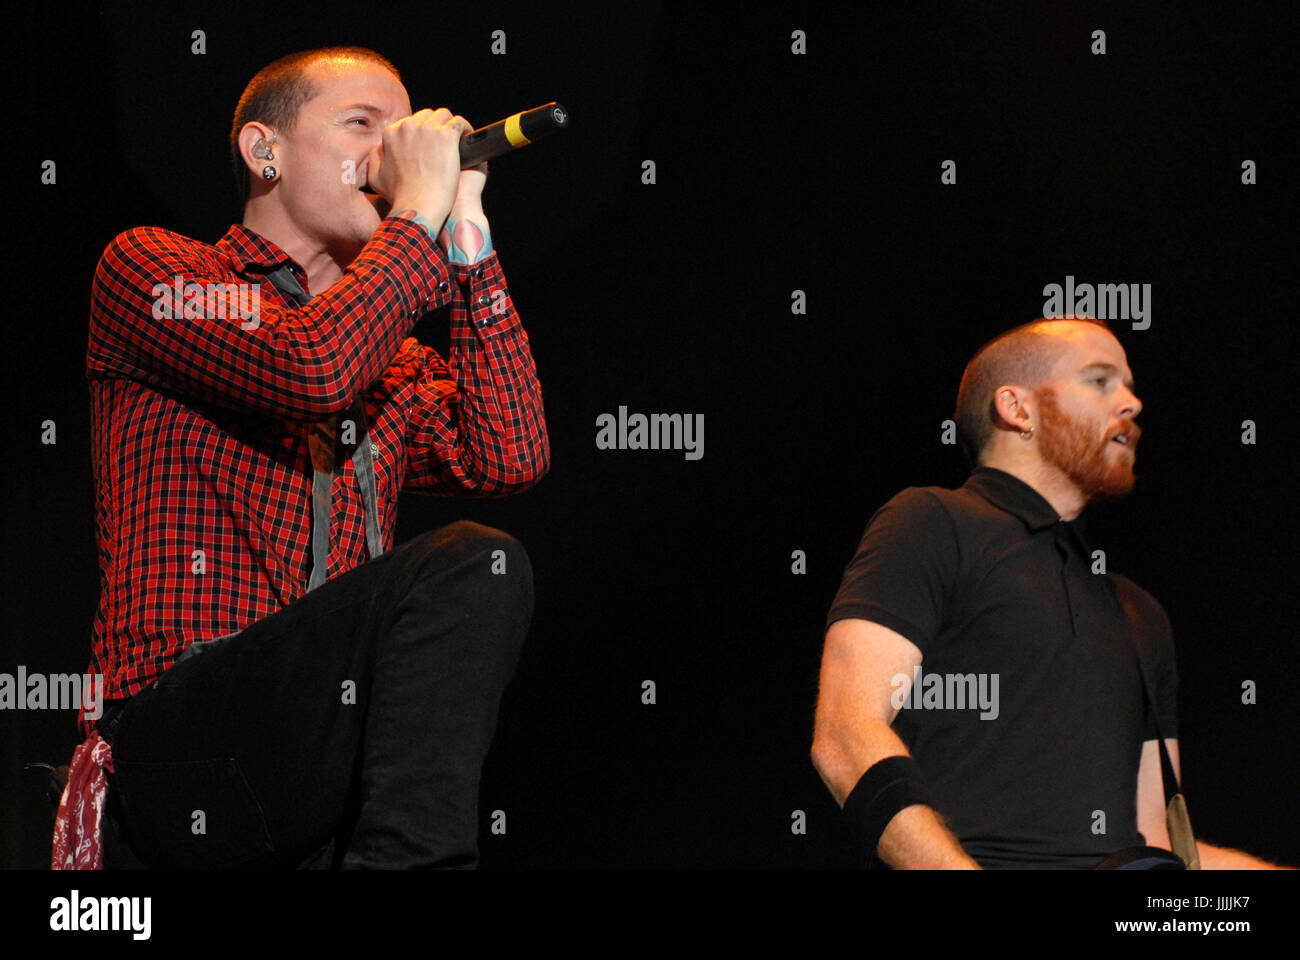 FILE PICS: 20th July, 2017. Donington Park, Derbyshire UK. 9th Jun, 2007. Chester Bennington, the lead singer of Linkin Park has passed away at the age of 41 today 20th July 2017 - Chester Bennington and David 'Phoenix' Farrell of Linkin Park photographed during their performance at Download Festival 2007 - day two 9th June 2007 at Donington Park, Derbyshire Credit: Ben Rector/Alamy Live News Stock Photo